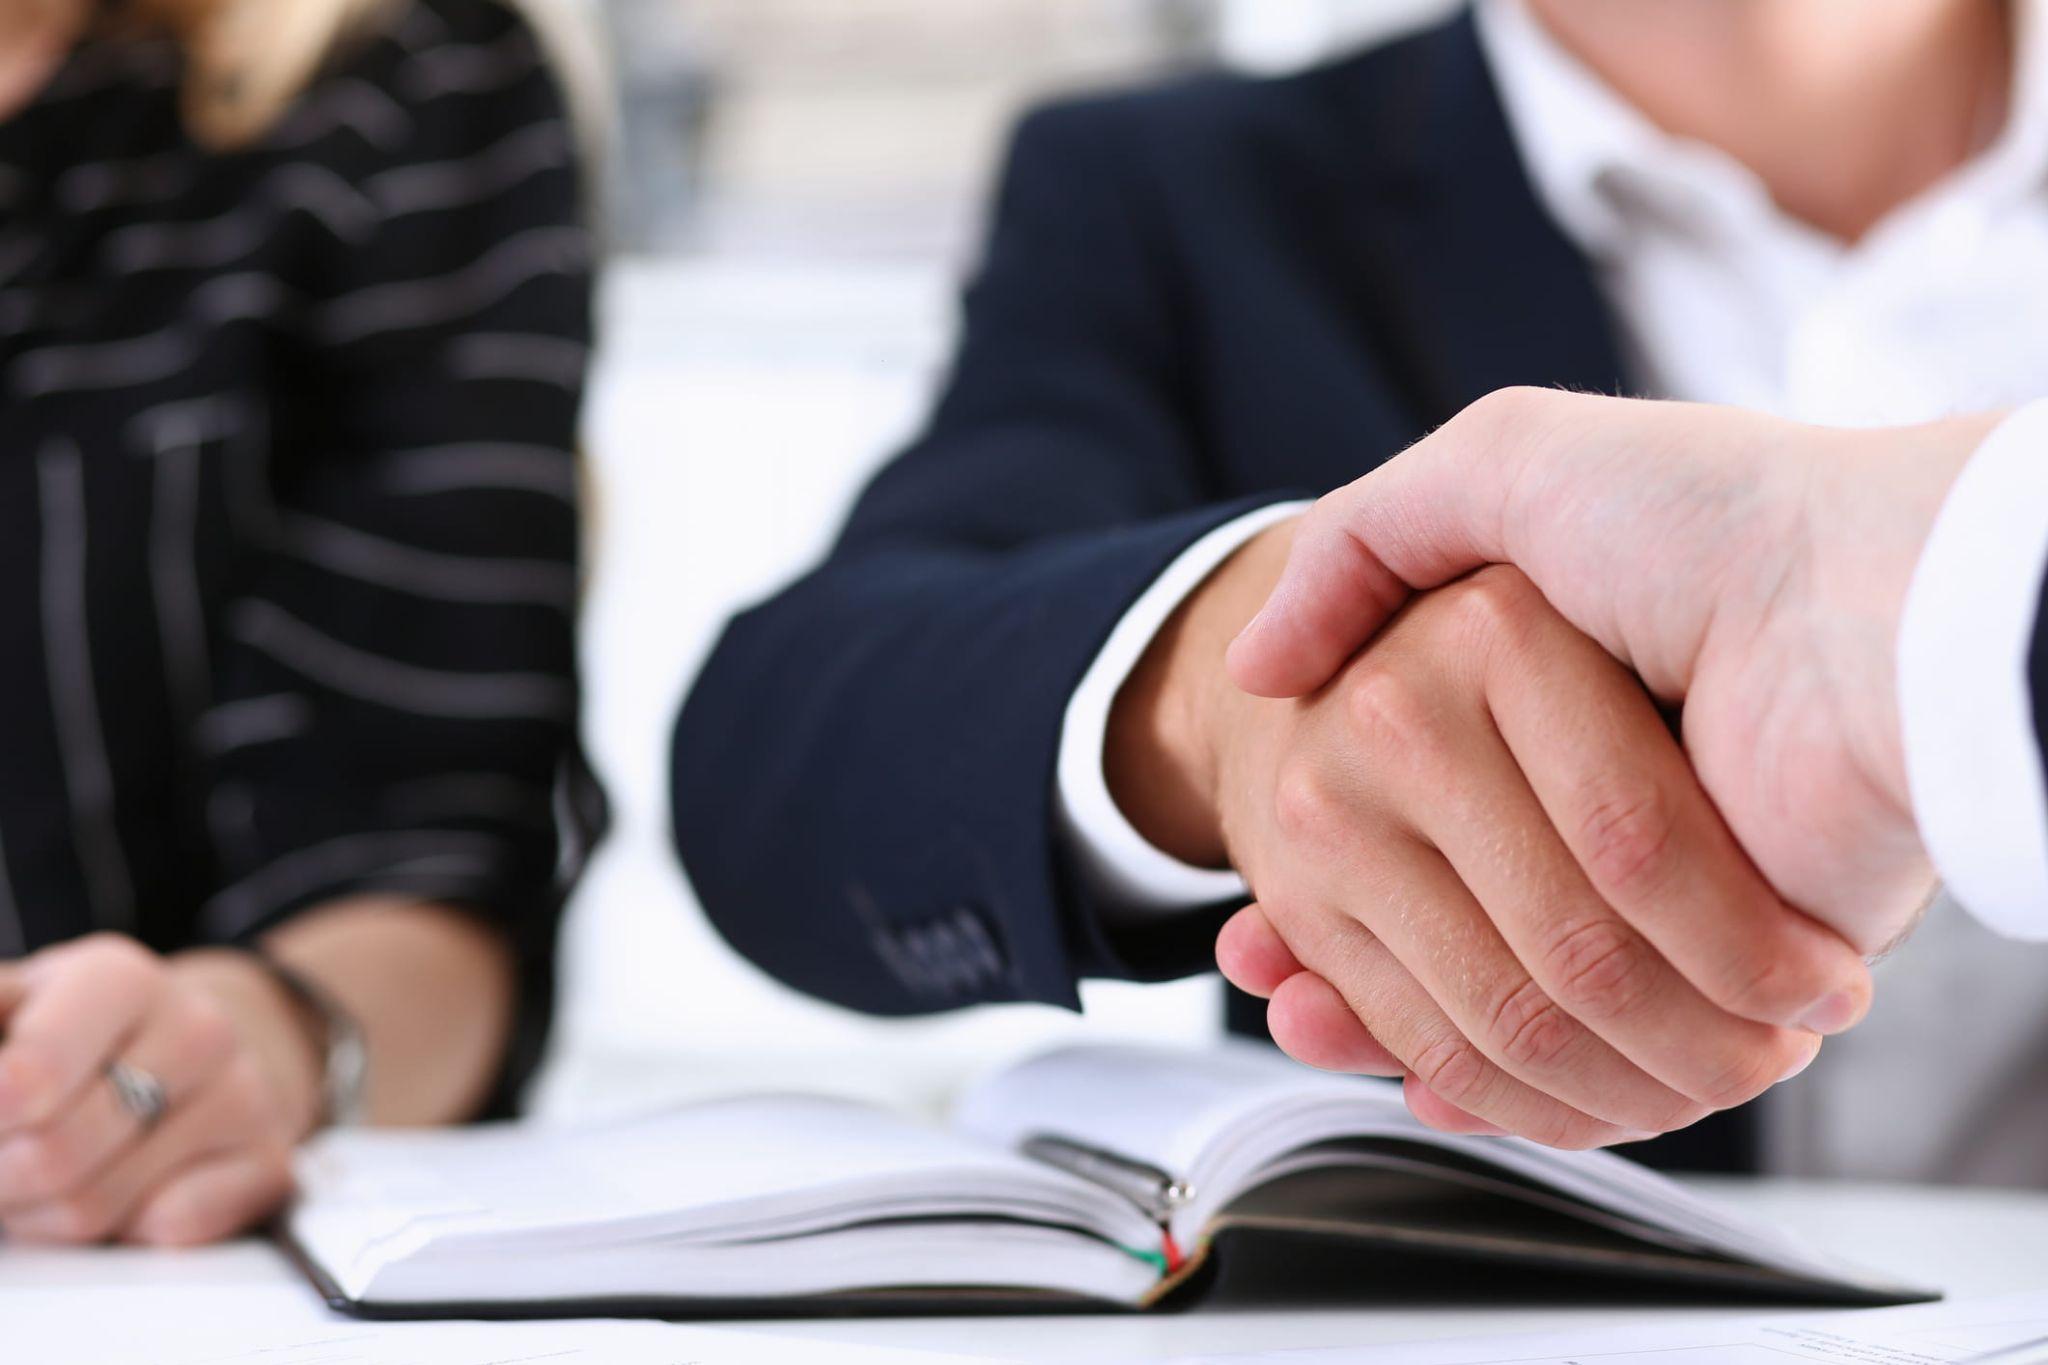 personal injury victim shaking the hand of a personal injury attorney